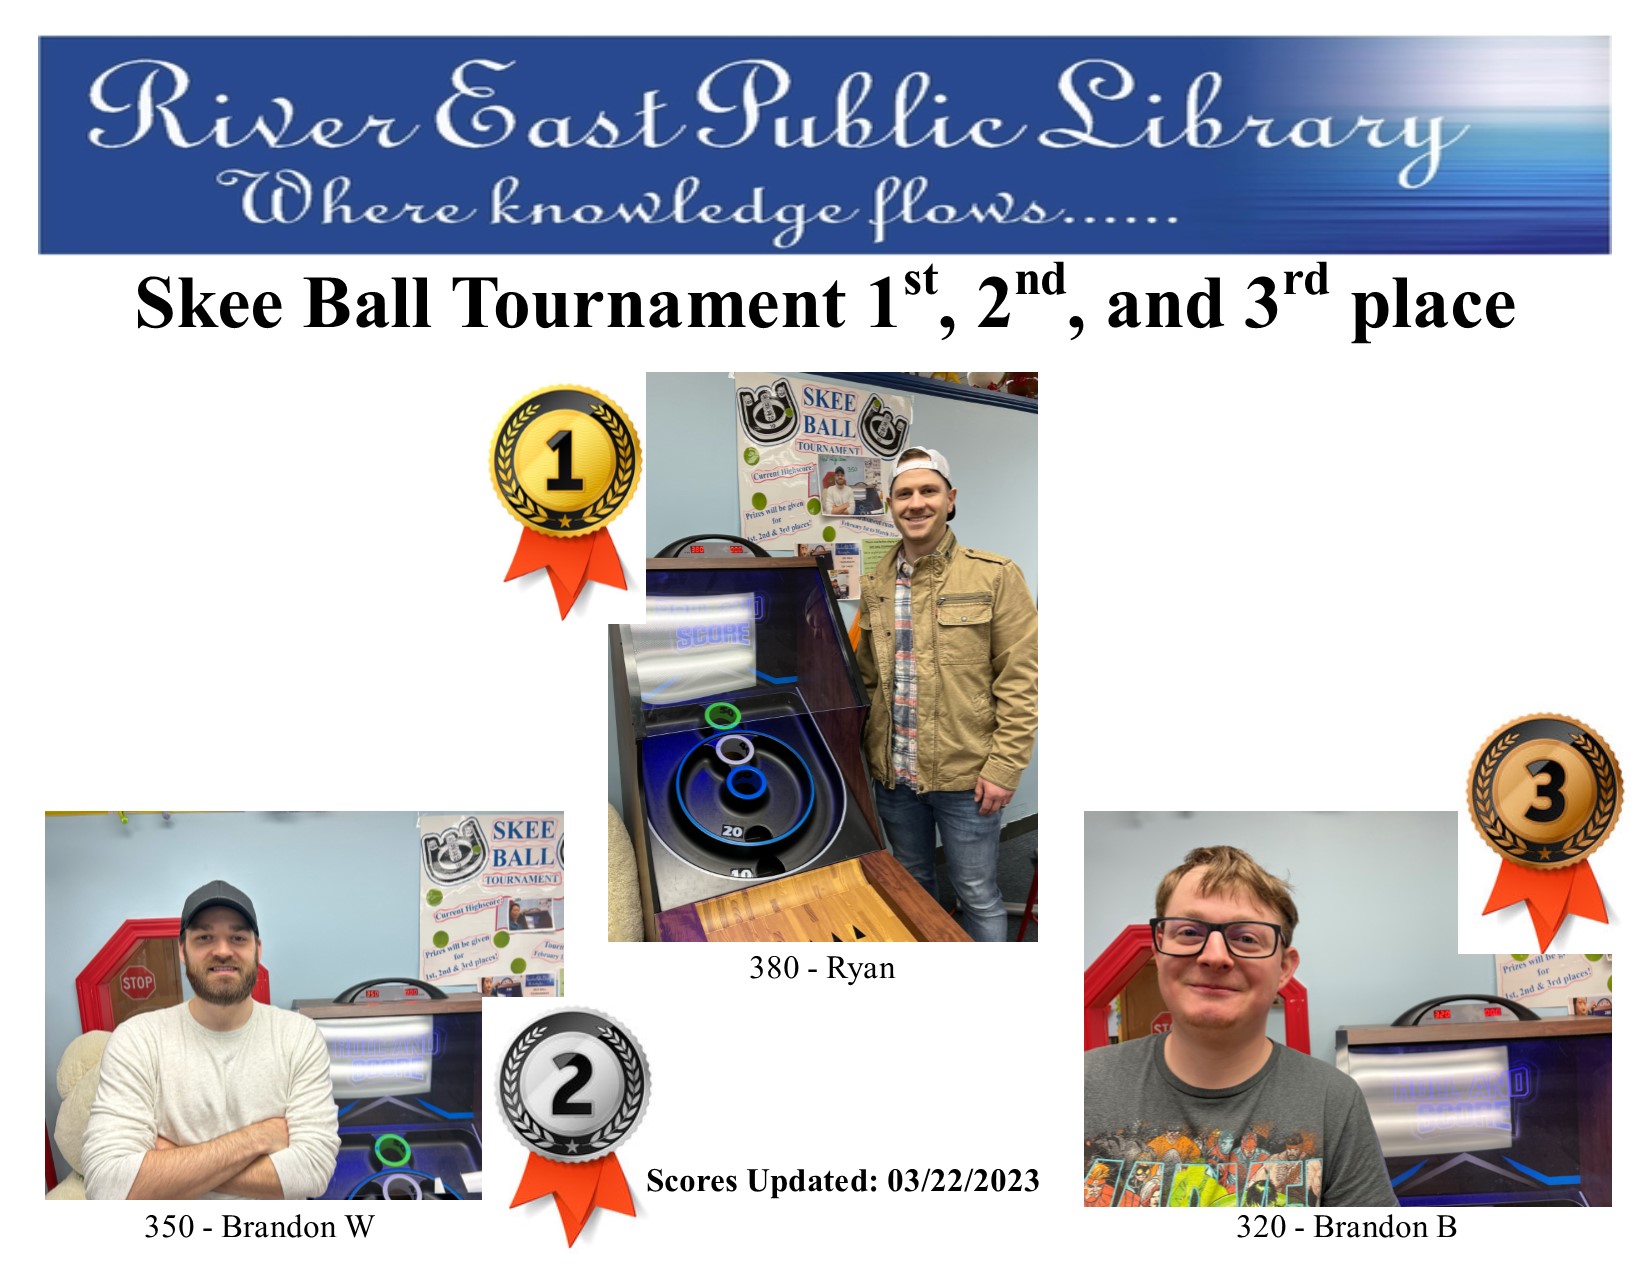 Poster showing our latest winners in the skee-ball tournament